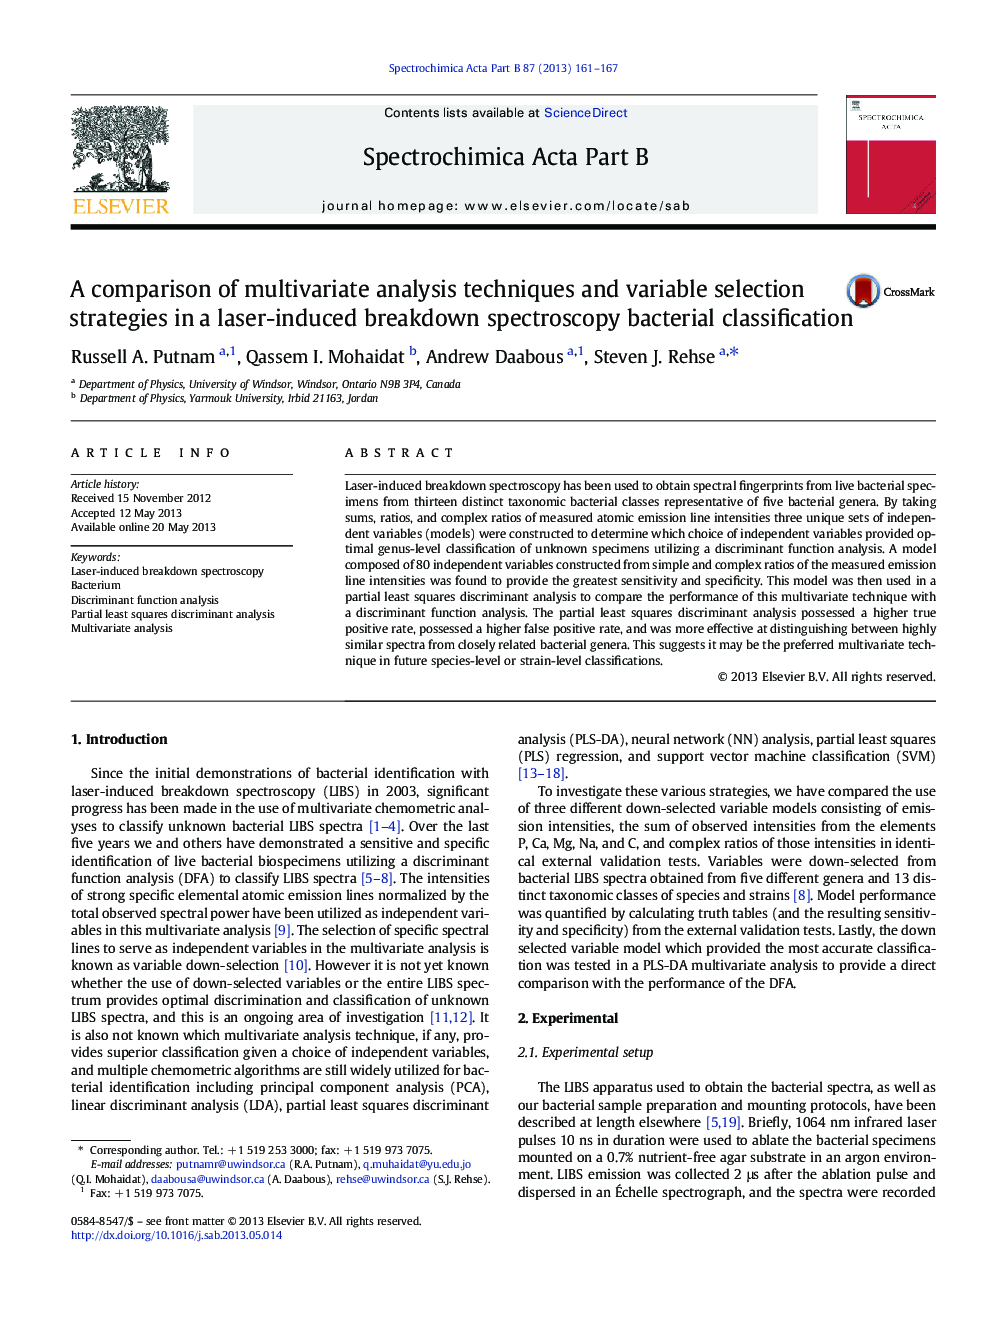 A comparison of multivariate analysis techniques and variable selection strategies in a laser-induced breakdown spectroscopy bacterial classification